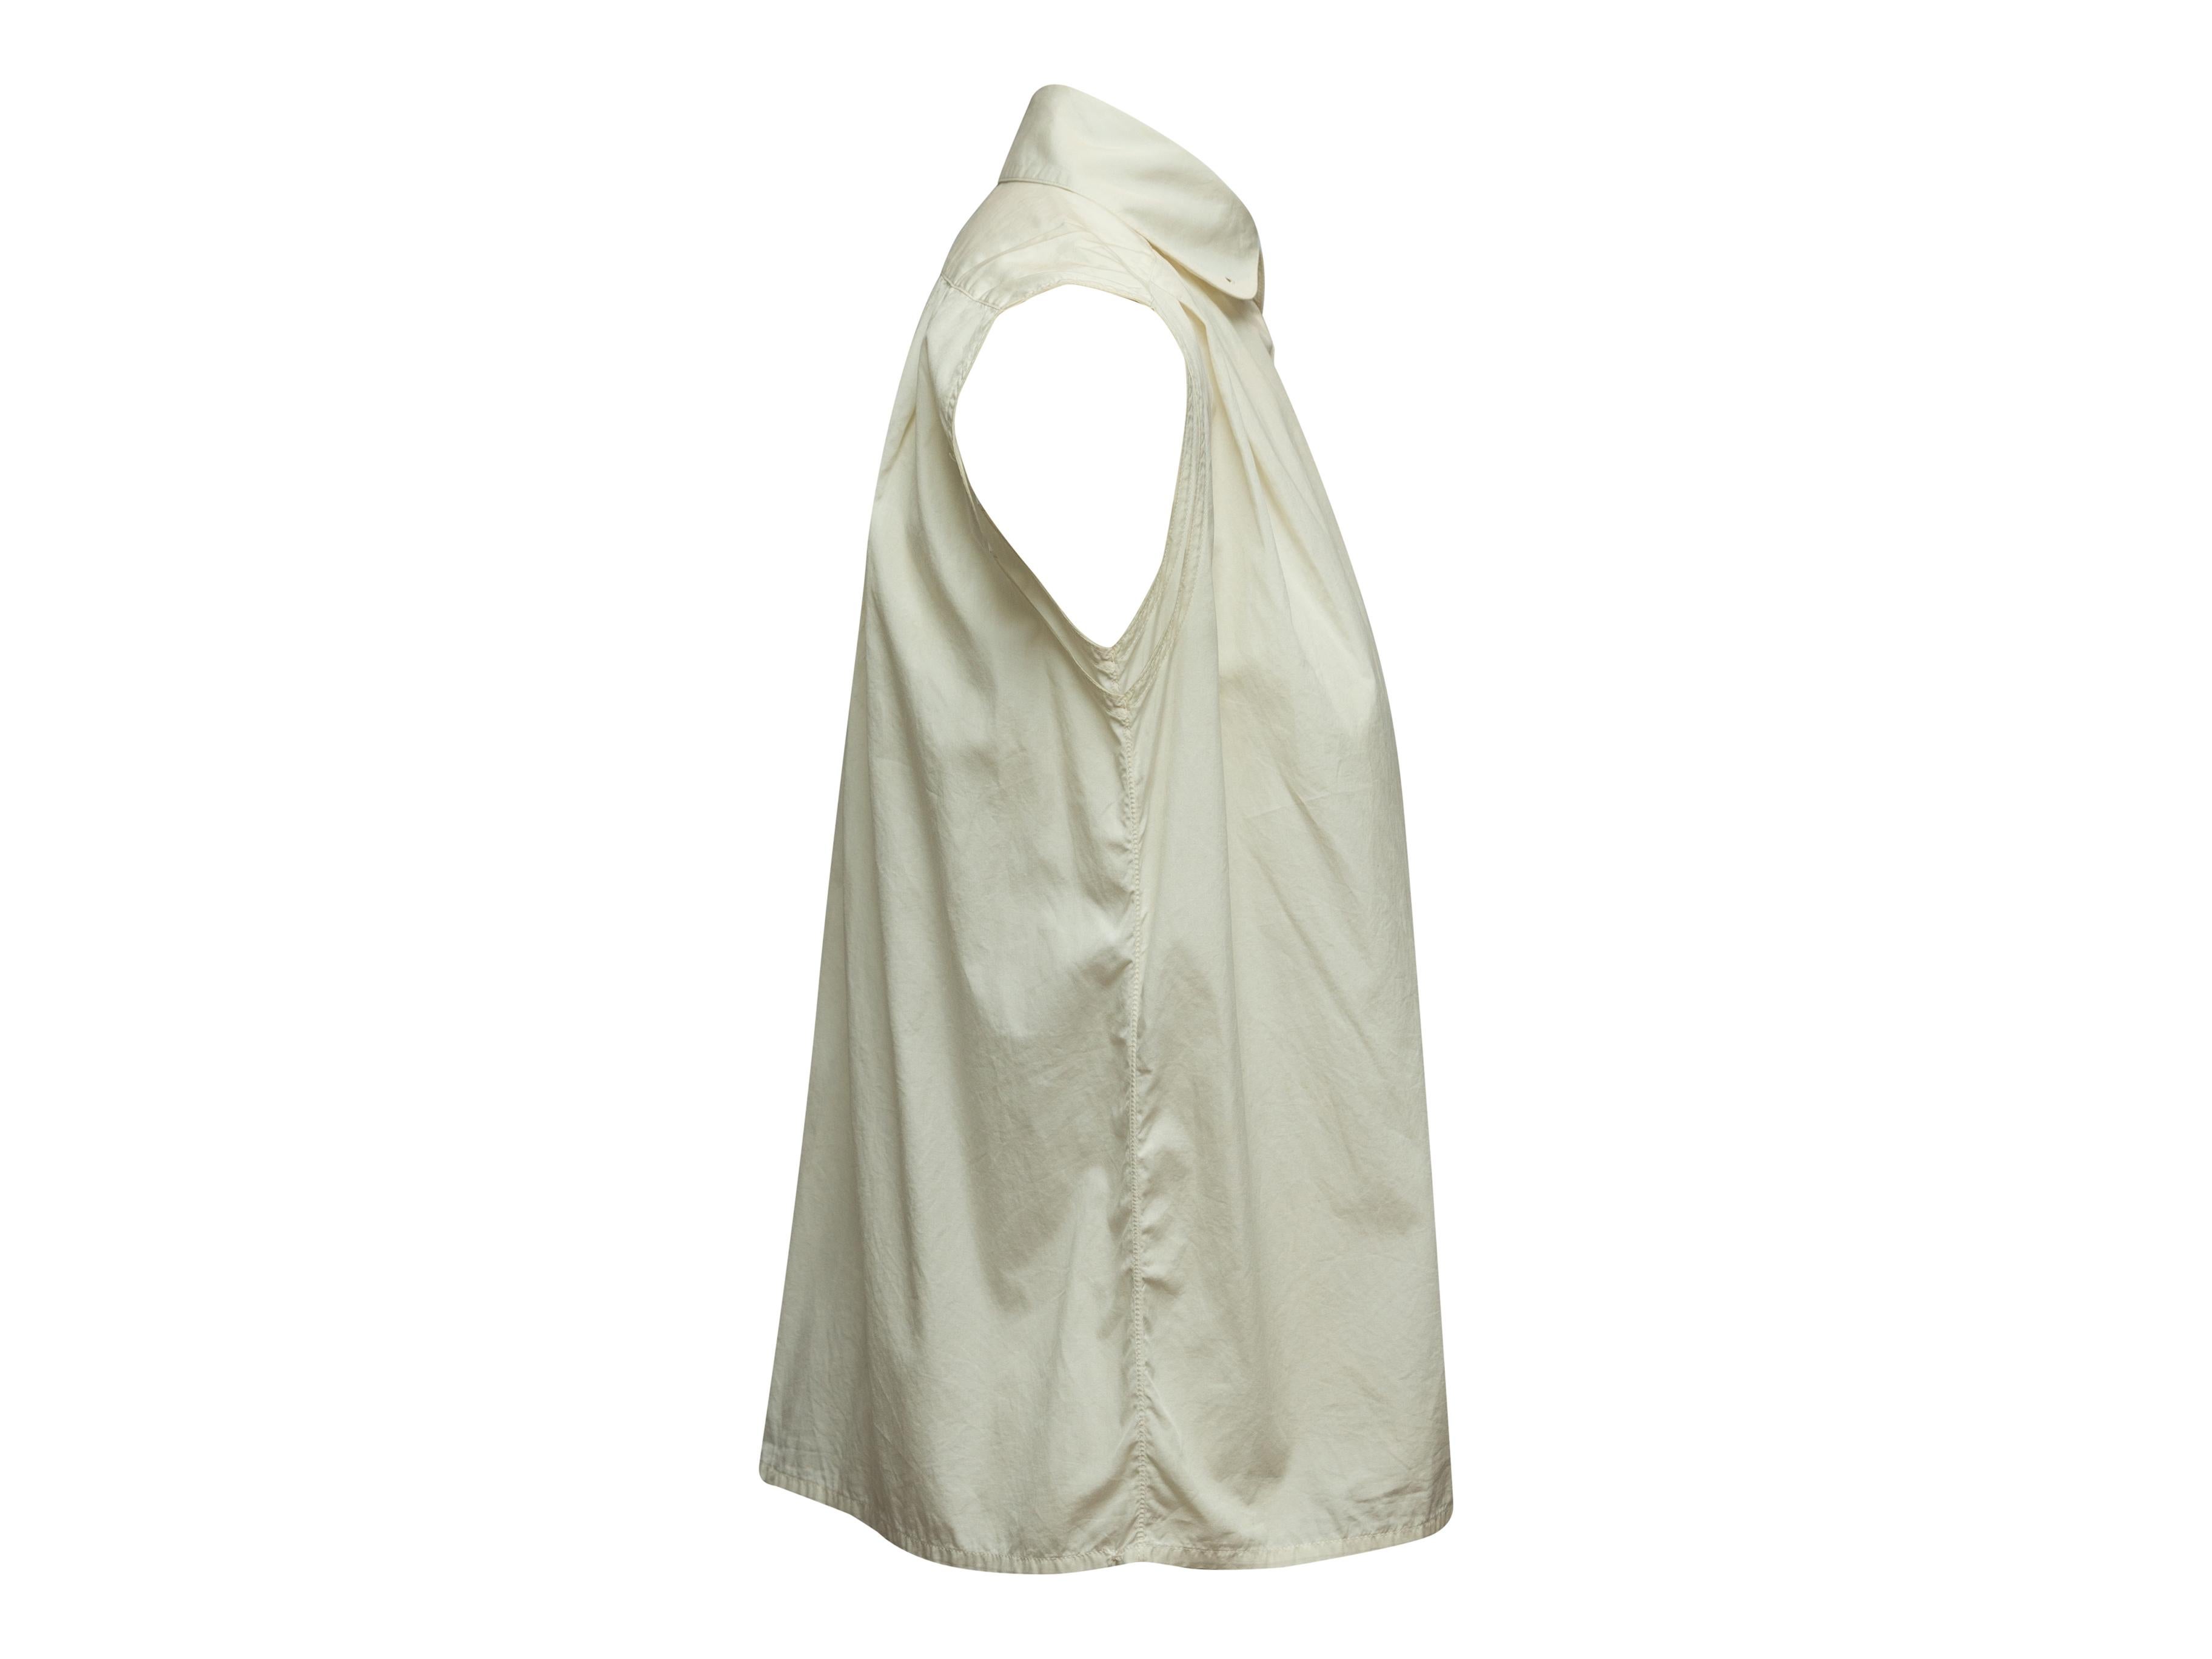 Product details: Vintage white sleeveless top by Chanel. Peter Pan collar. Concealed closures at front. 41